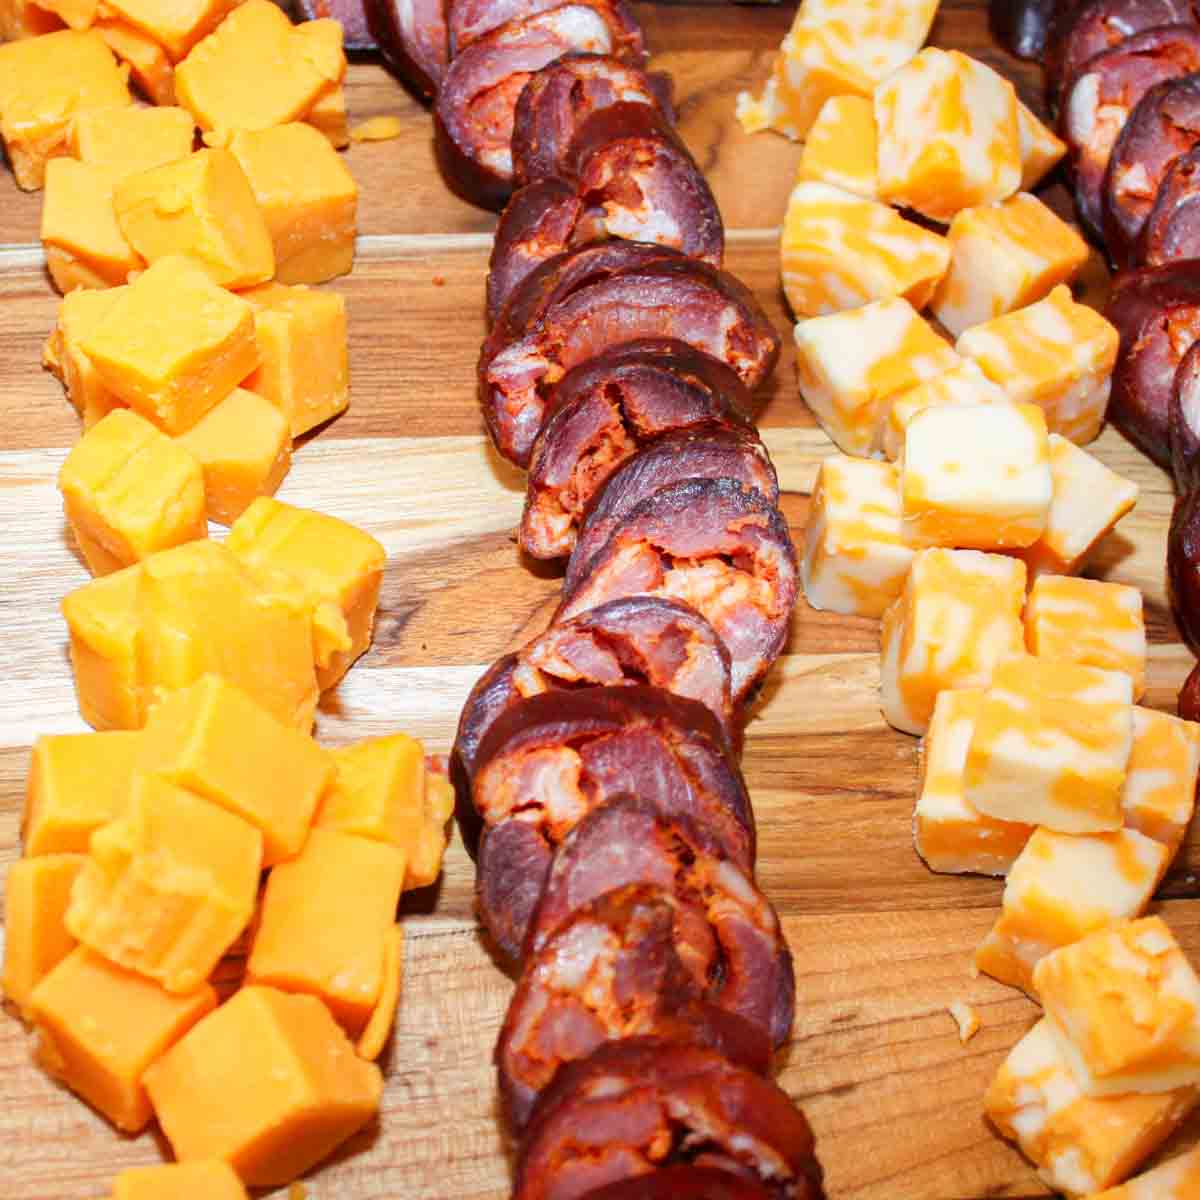 A tray of cheese and Portuguese sausage on a wooden board.